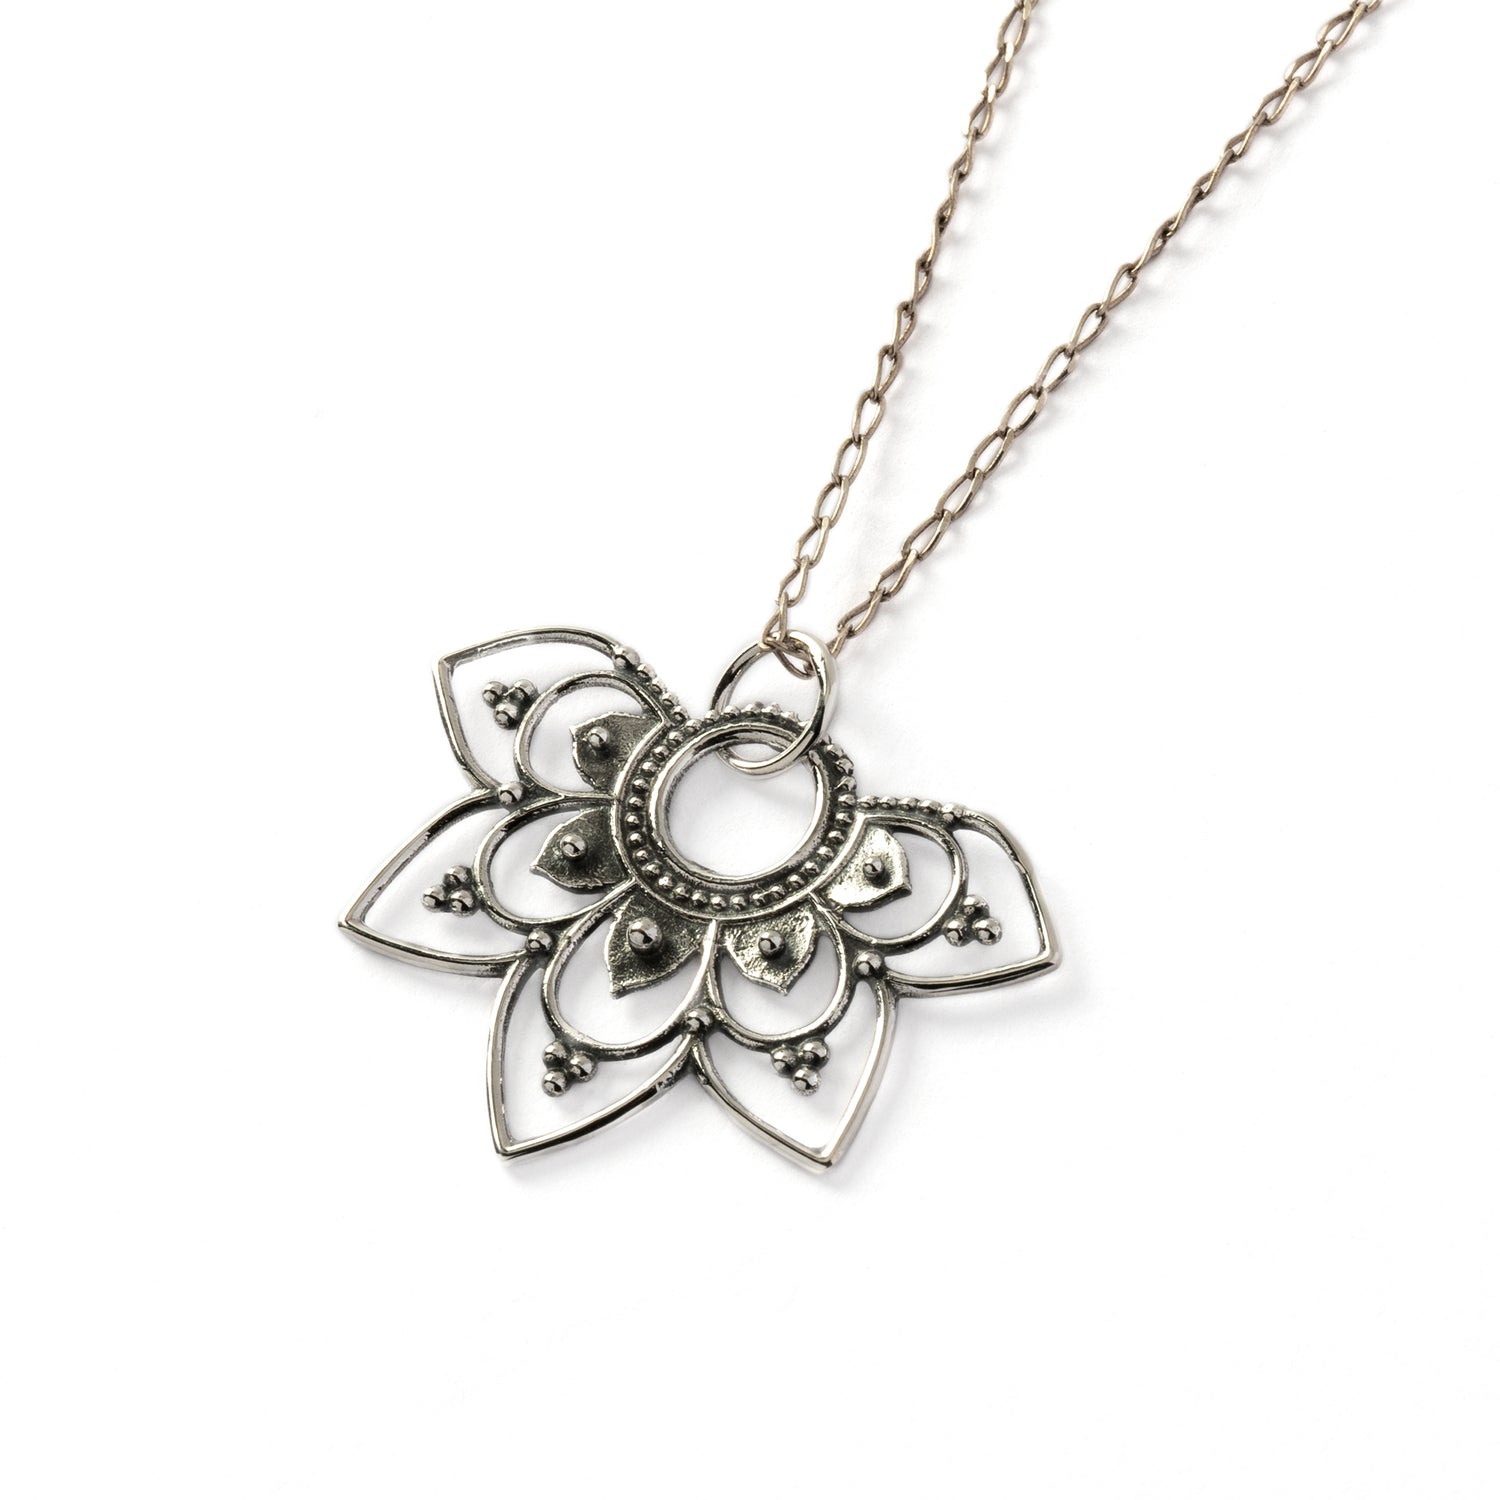 Vinyasa flower silver necklace right side view